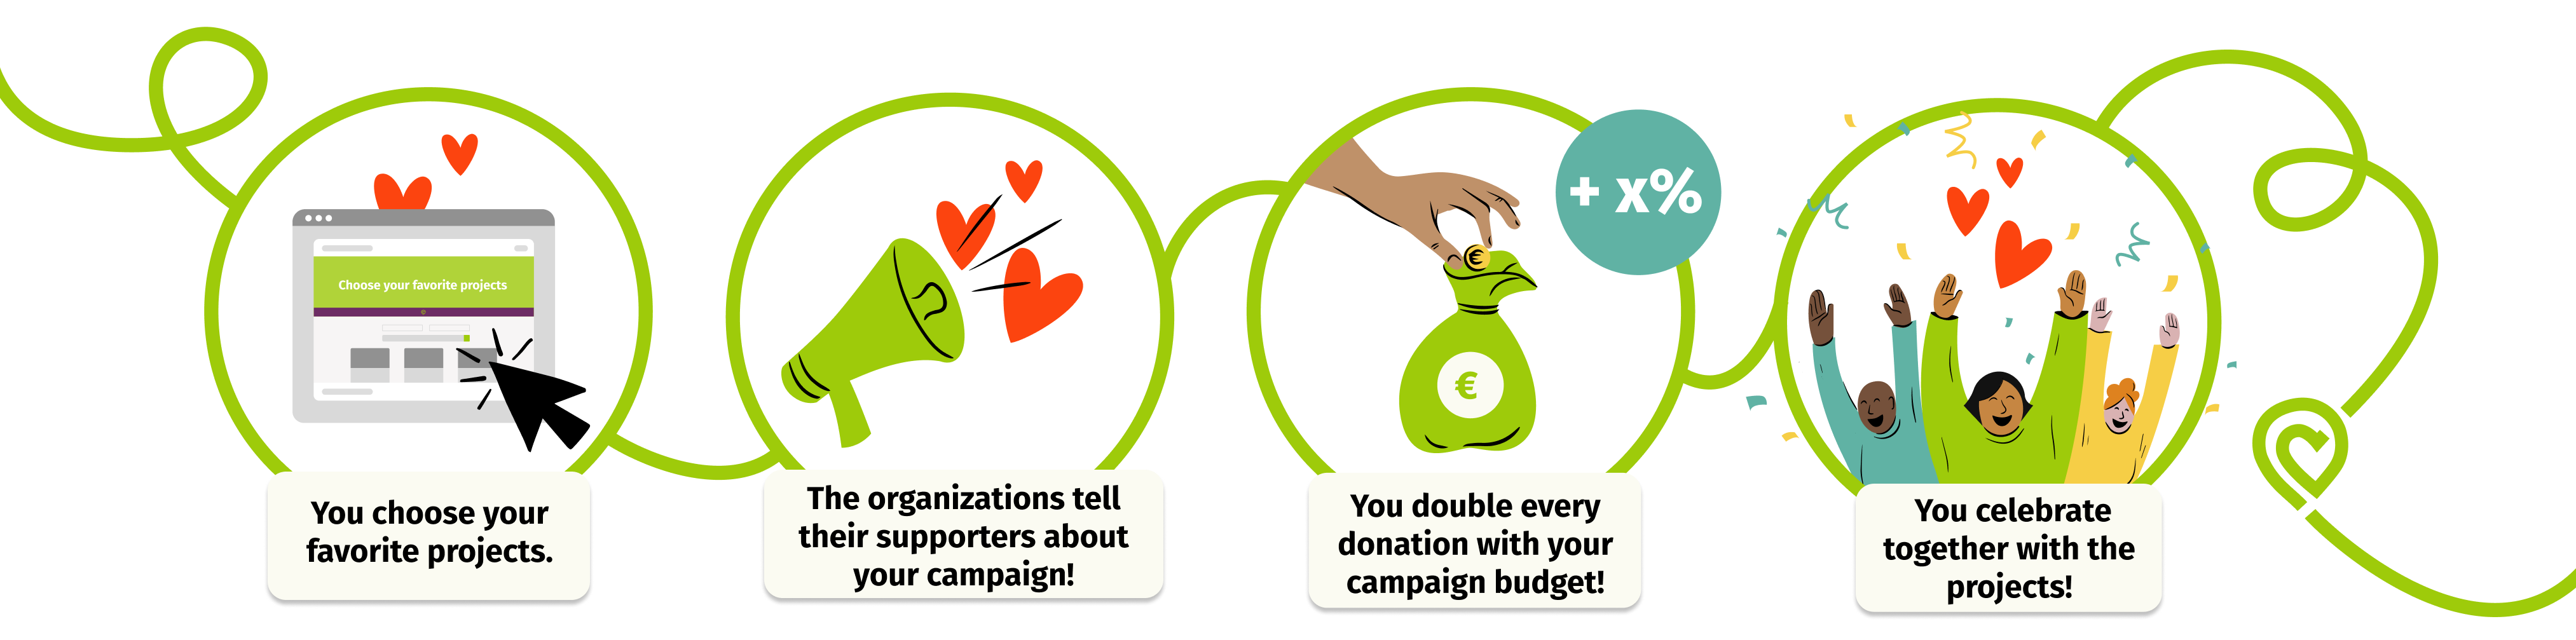 Here is an illustration-style infographic consisting of four circles arranged horizontally, representing the steps of how to start and communicate a doubling campaign. The first circle shows a website in which a mouse pointer clicks on a donation project. Below this is a text panel with the content 'You choose your favorite projects'. The second circle shows a megaphone from which hearts are flying. Below the graphic is a text panel with the content 'The organizations tell their supporters about your campaign'. In circle number 3, a money bag is shown into which a hand is inserting a coin from above. The text field below the graphic reads 'You double every donation with your campaign budget'. Three cheering people are shown in the last circle. Below the graphic is a text panel with the content 'You celebrate together with the projects'.